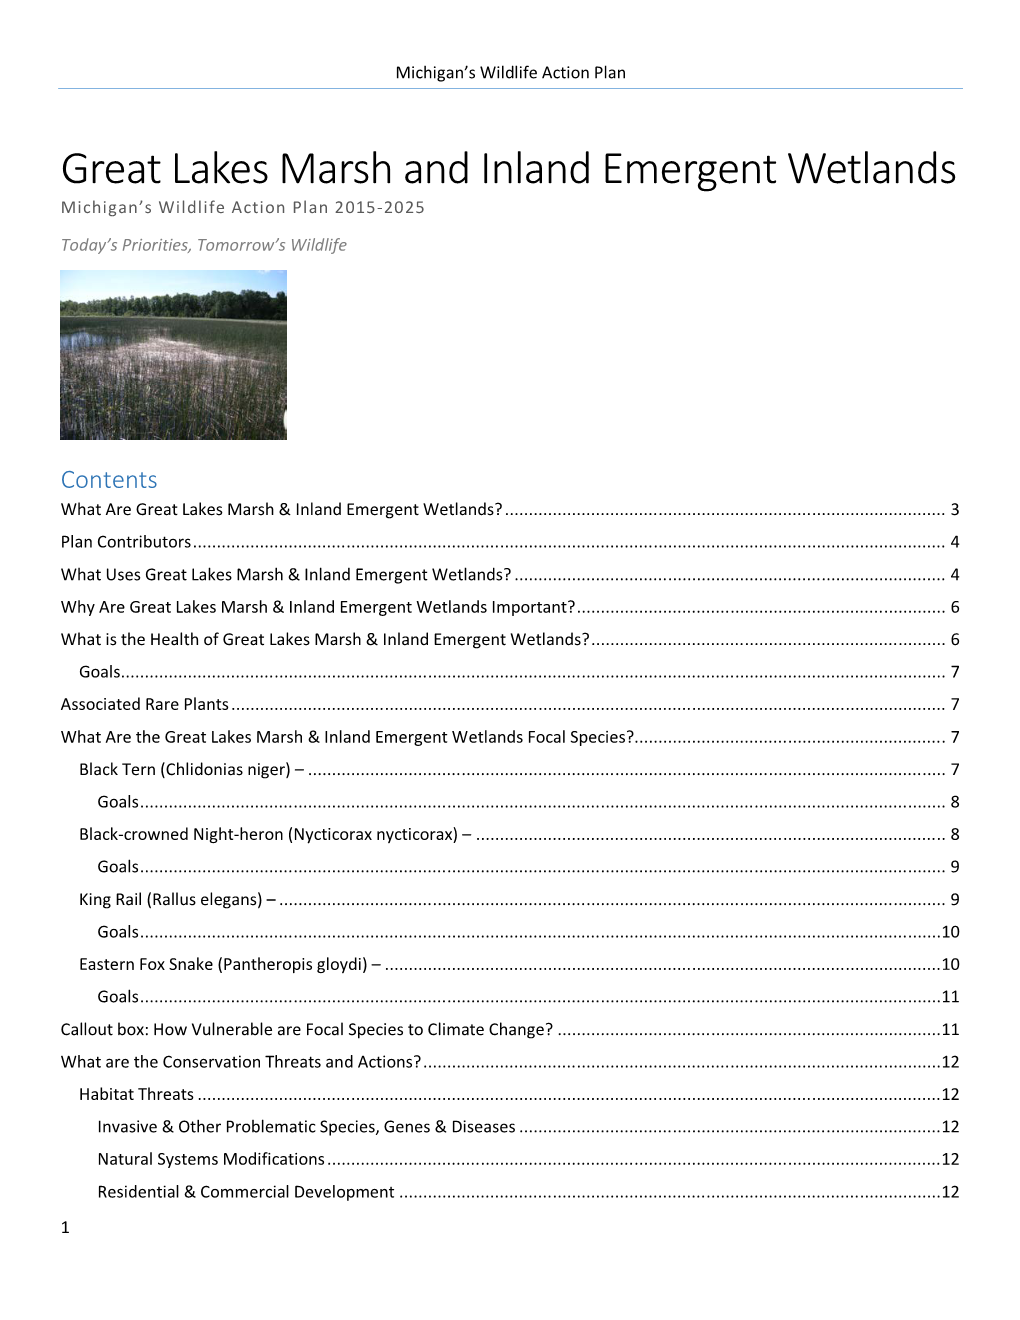 Wildlife Action Plan: Great Lakes Marsh and Emergent Wetlands